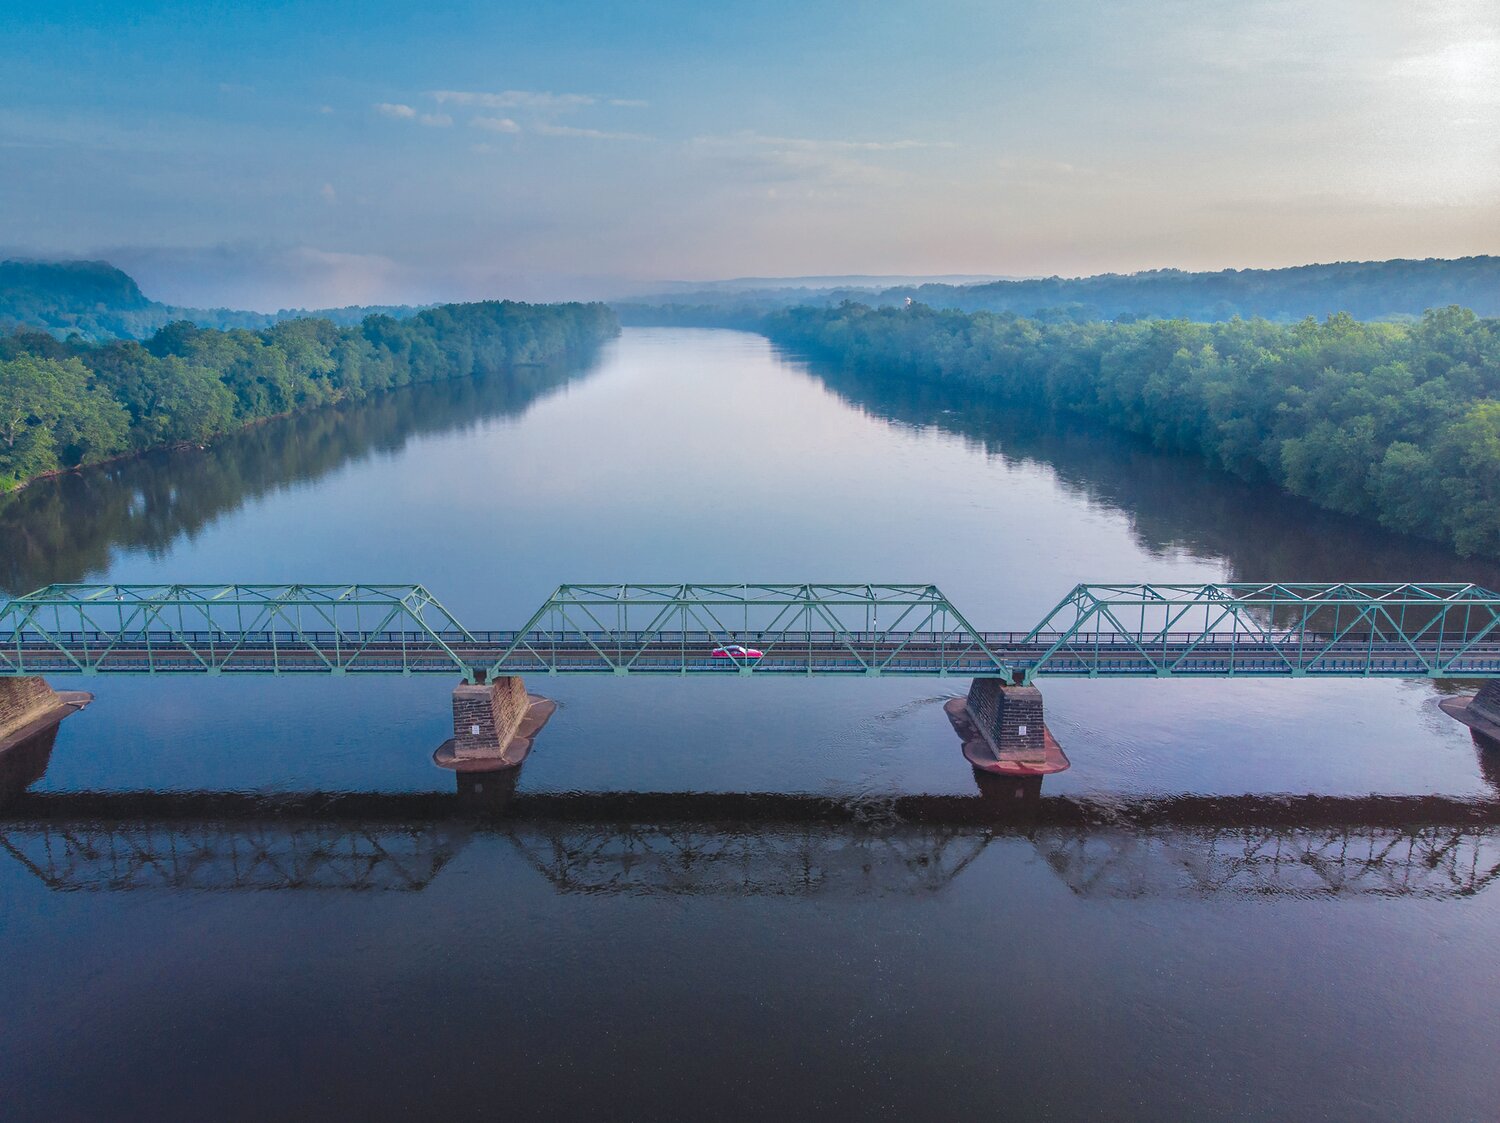 A single car traverses the Uhlerstown-Frenchtown Bridge over the Delaware River on July 20, 2019. We’re on the cusp of another Bucks County summer and the majestic Delaware is ready to welcome it to its beautiful shores.